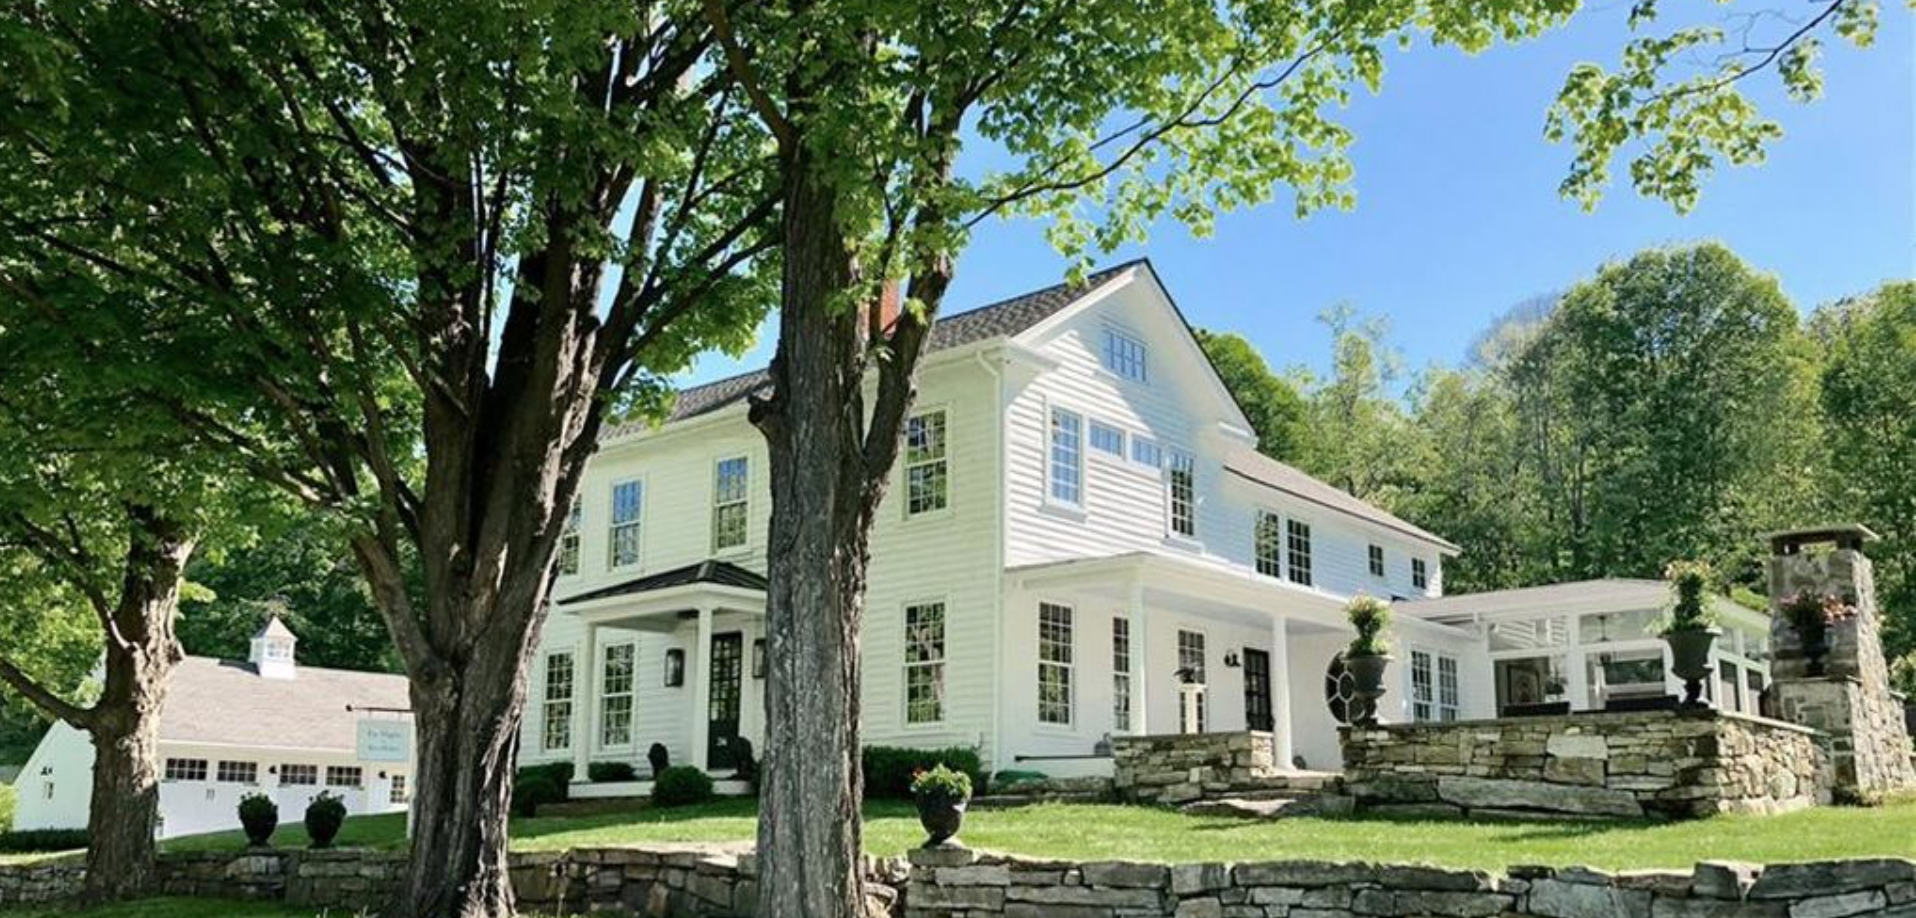 RECENT SALE: New Milford, CT $1,188,000 Represented Buyer